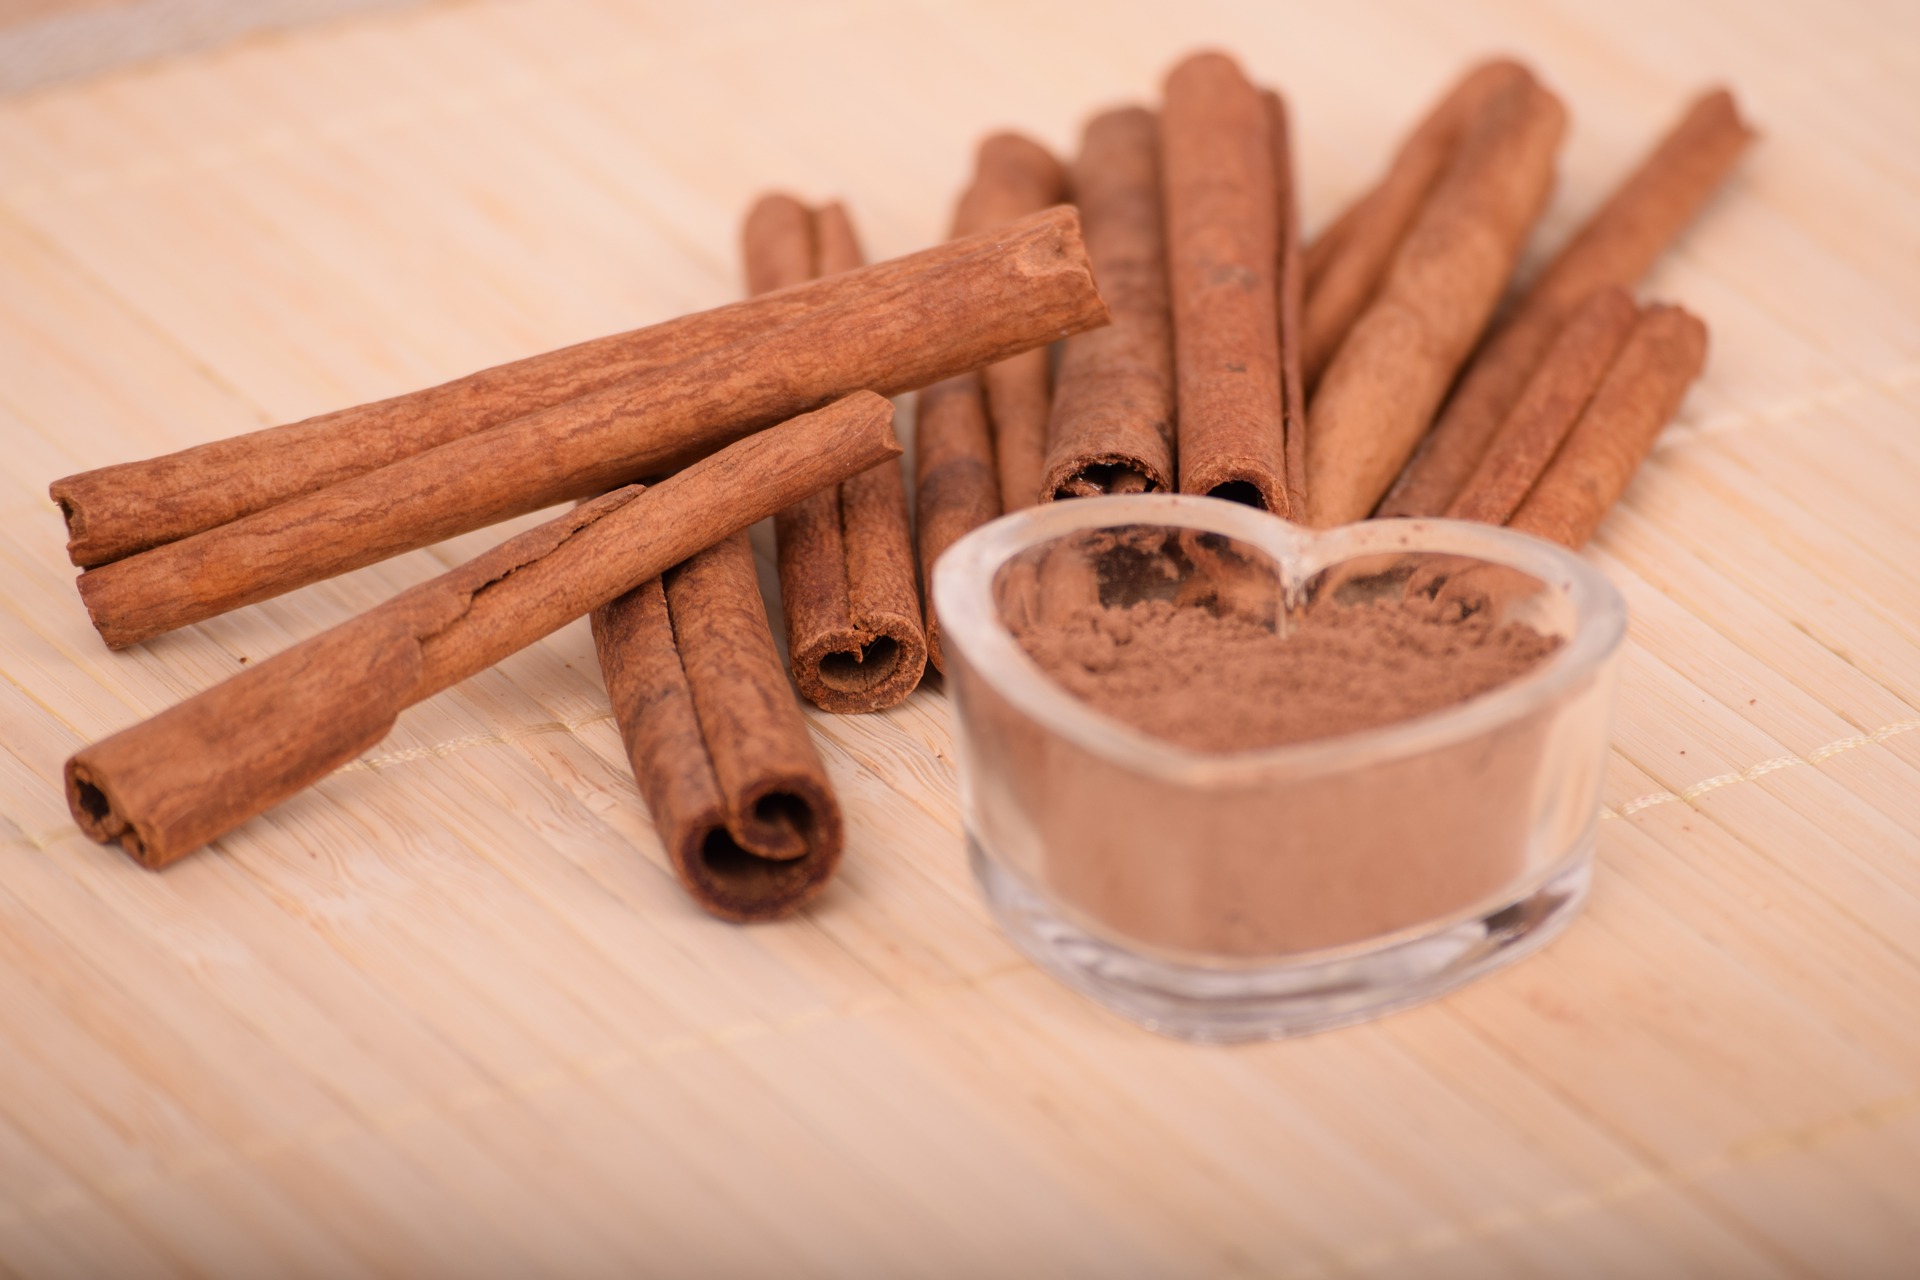 Spice Up Your Smoothie With Cinnamon